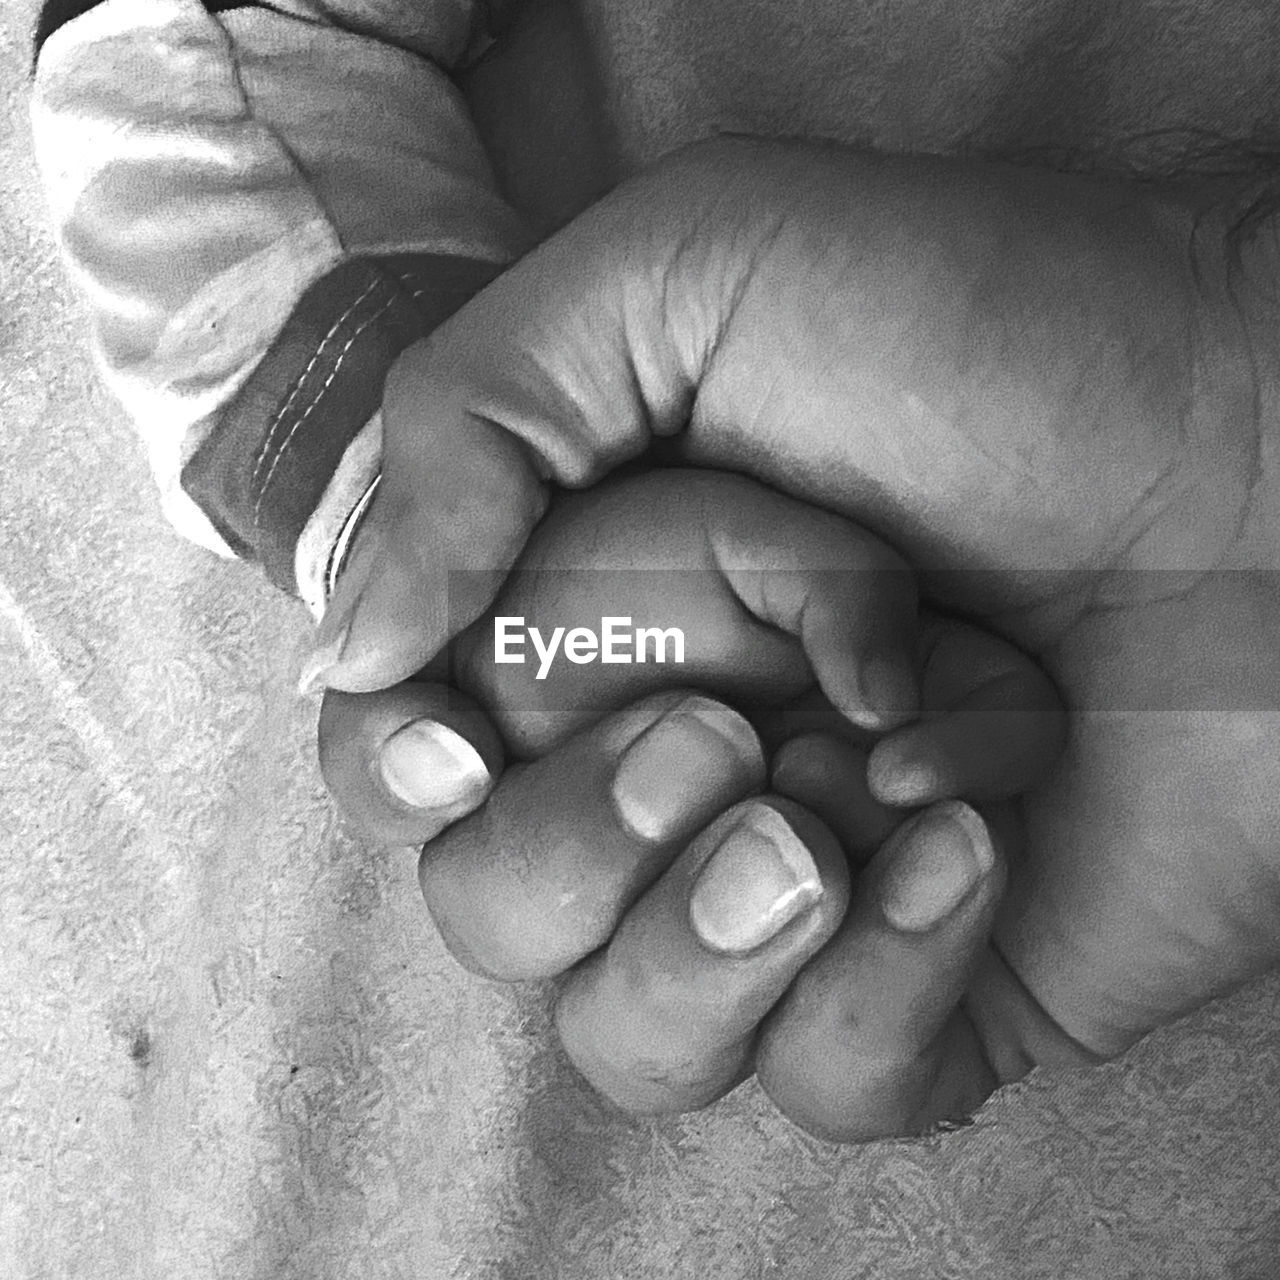 CLOSE-UP OF BABY HAND WITH TATTOO ON HANDS